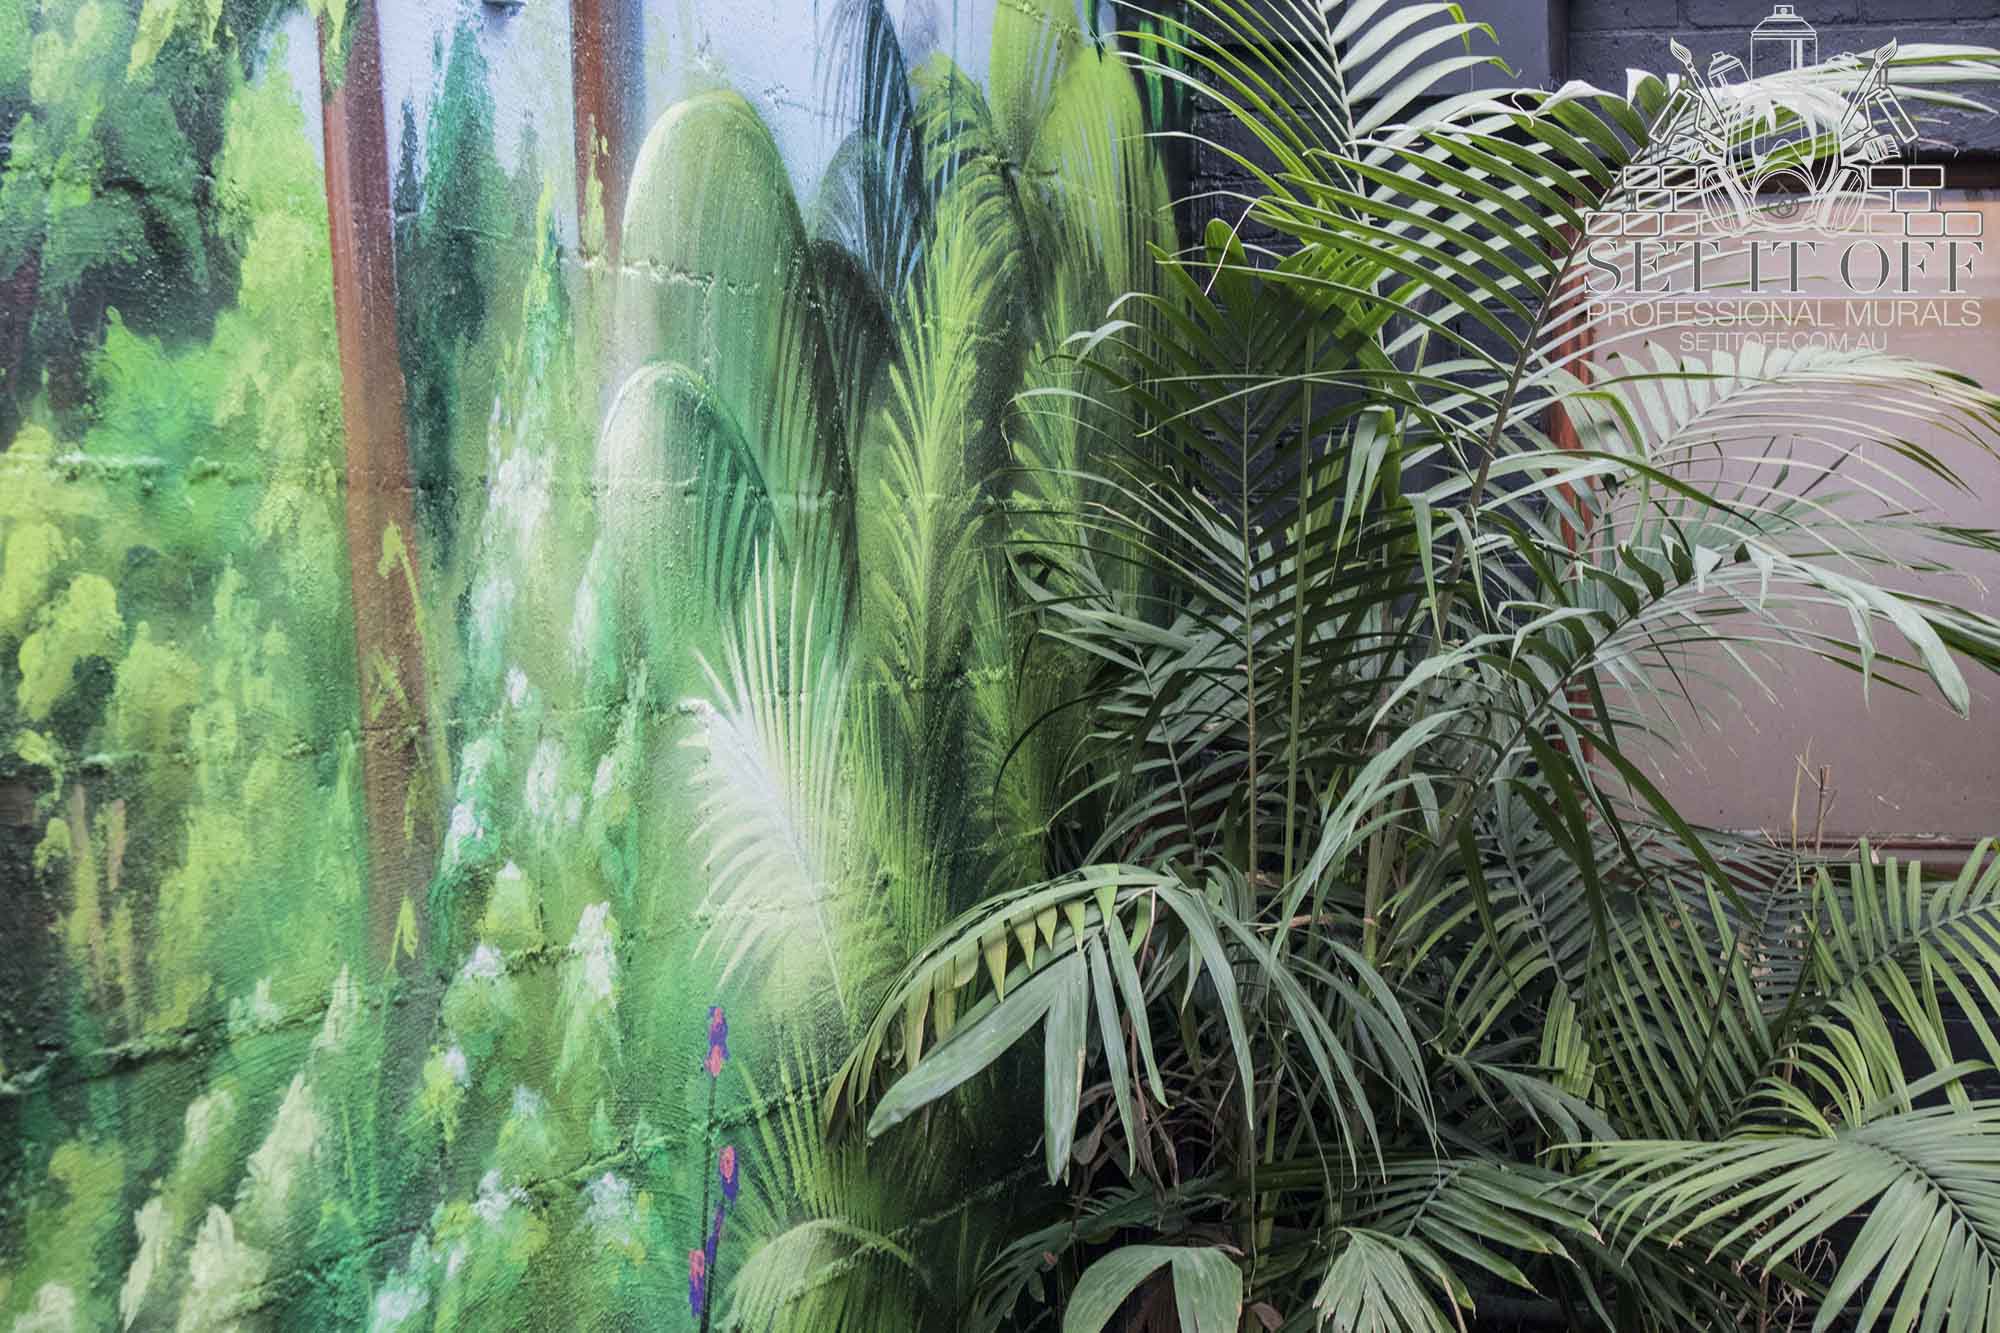 A tropical wall mural inside Forest cafe courtyard.